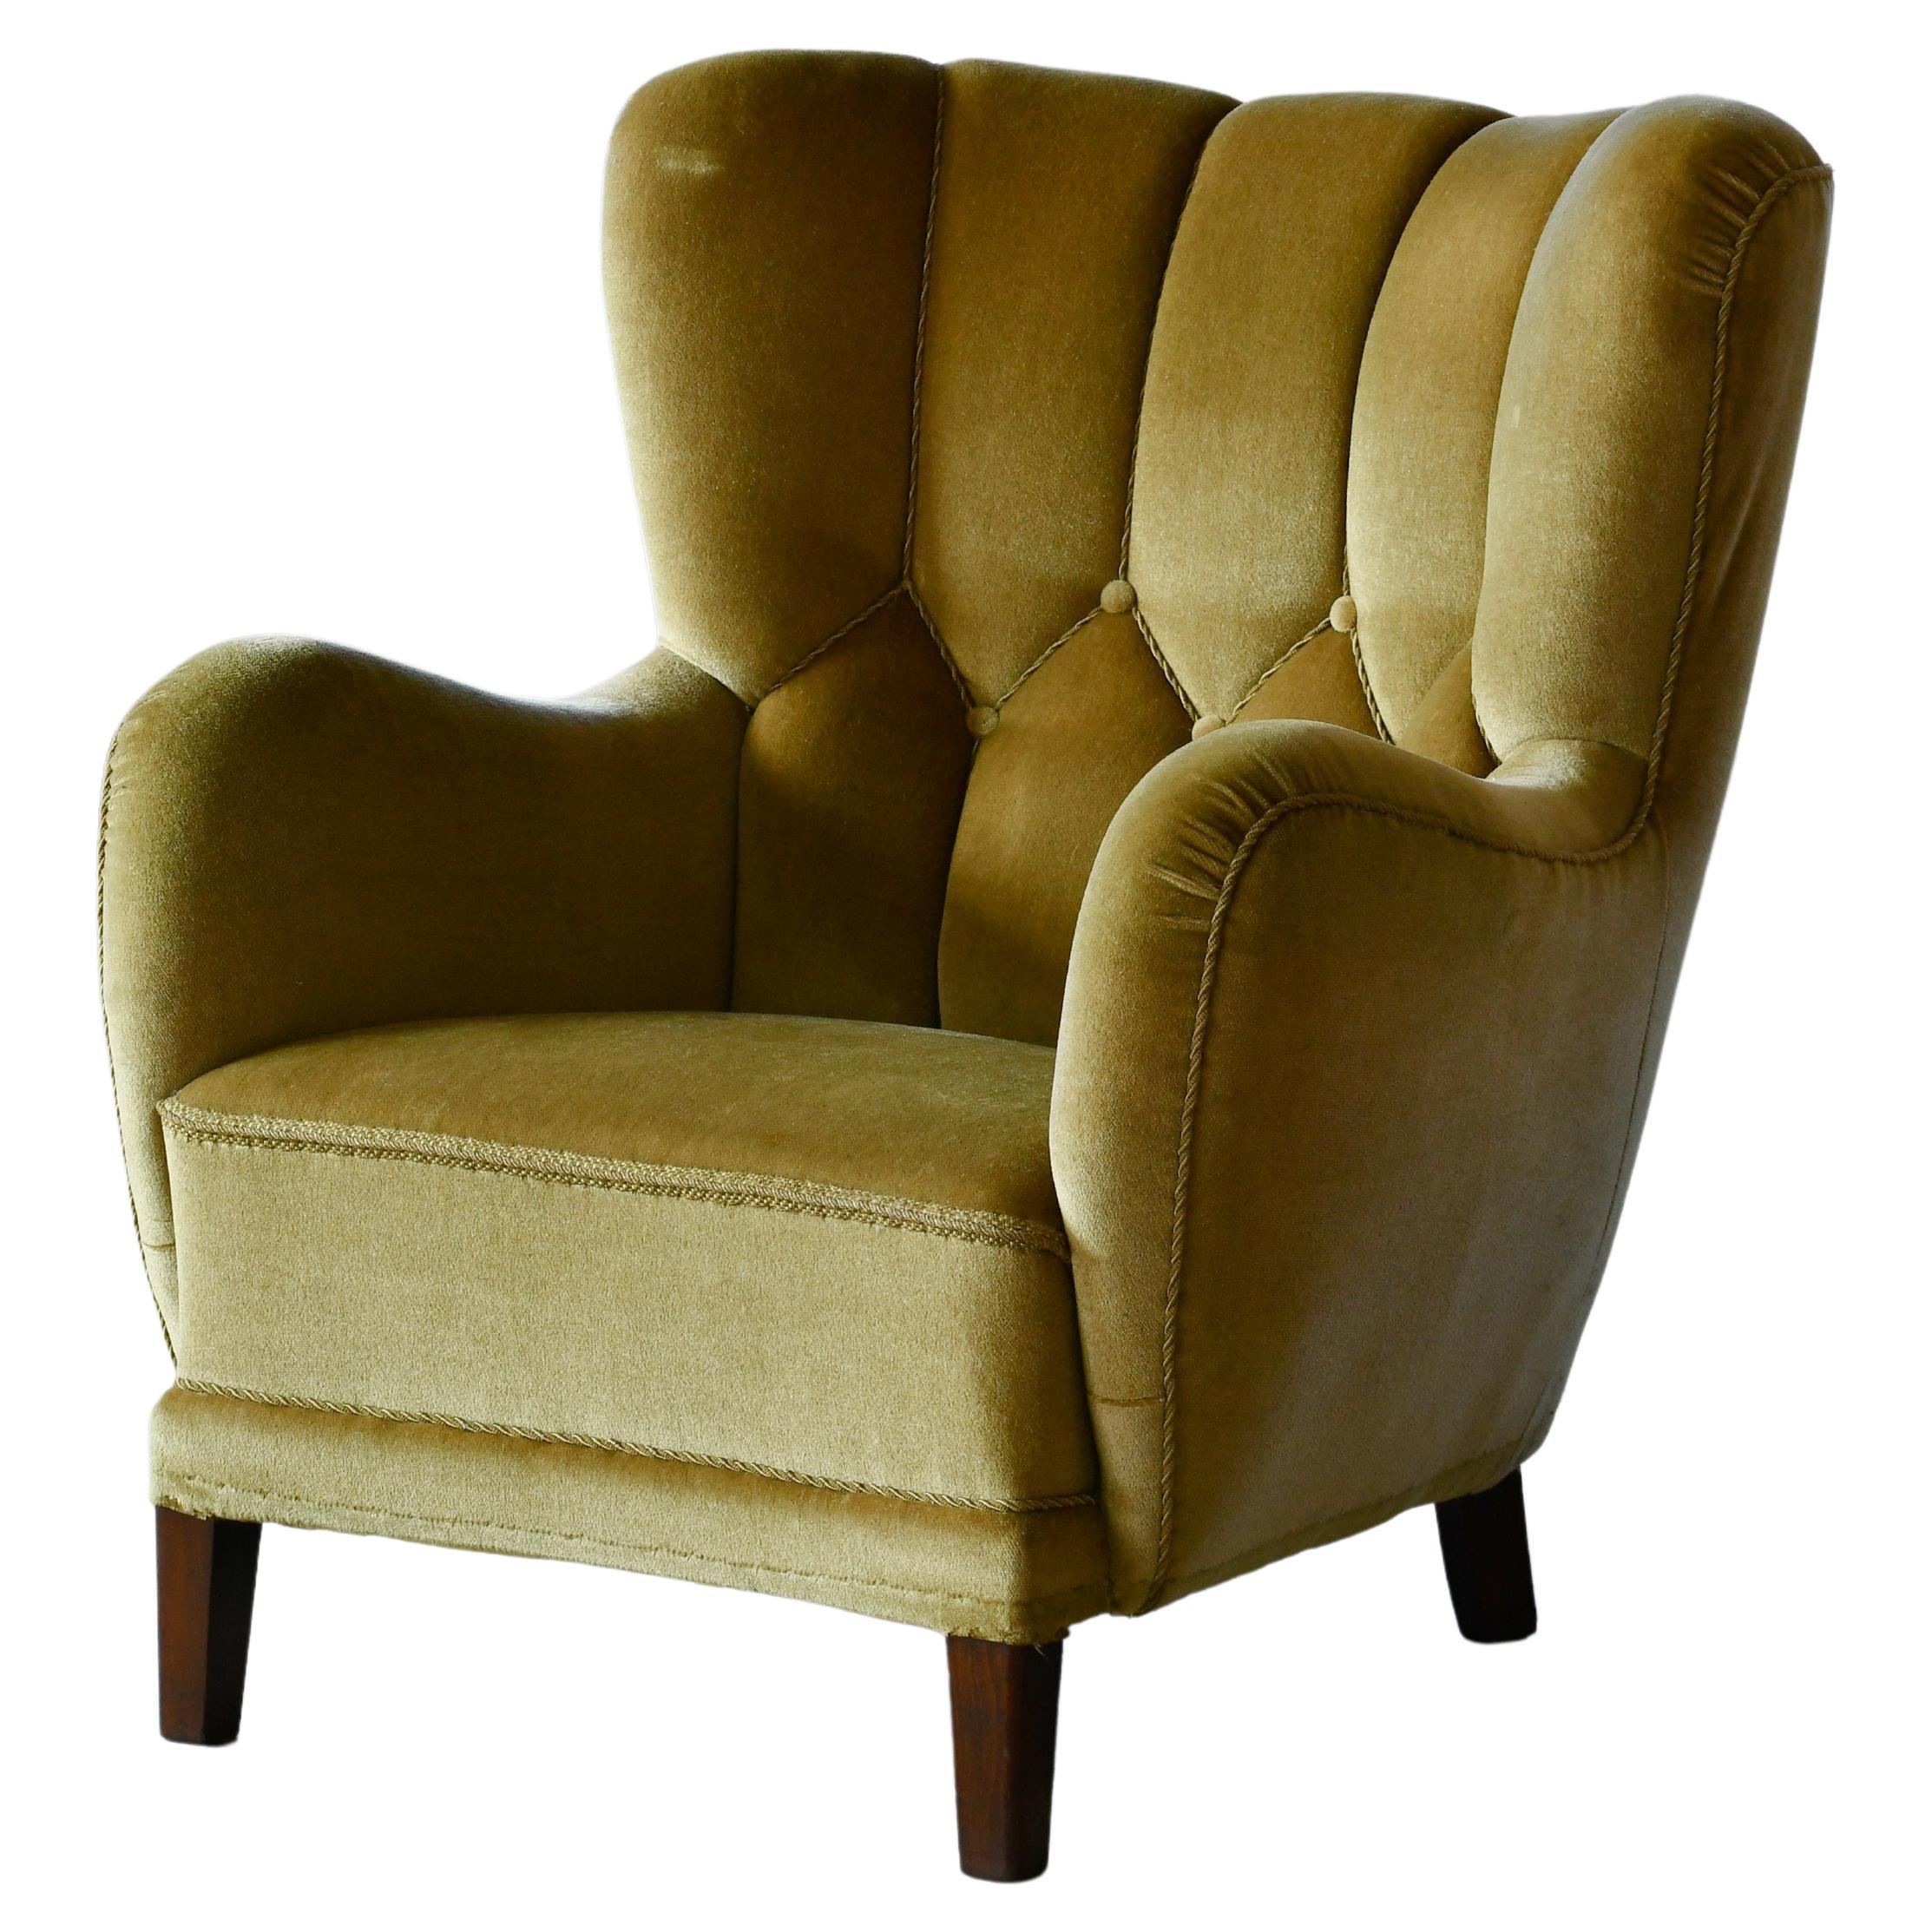 Danish 1940s Channel Back Semi Tall Lounge Chair in Green Mohair For Sale